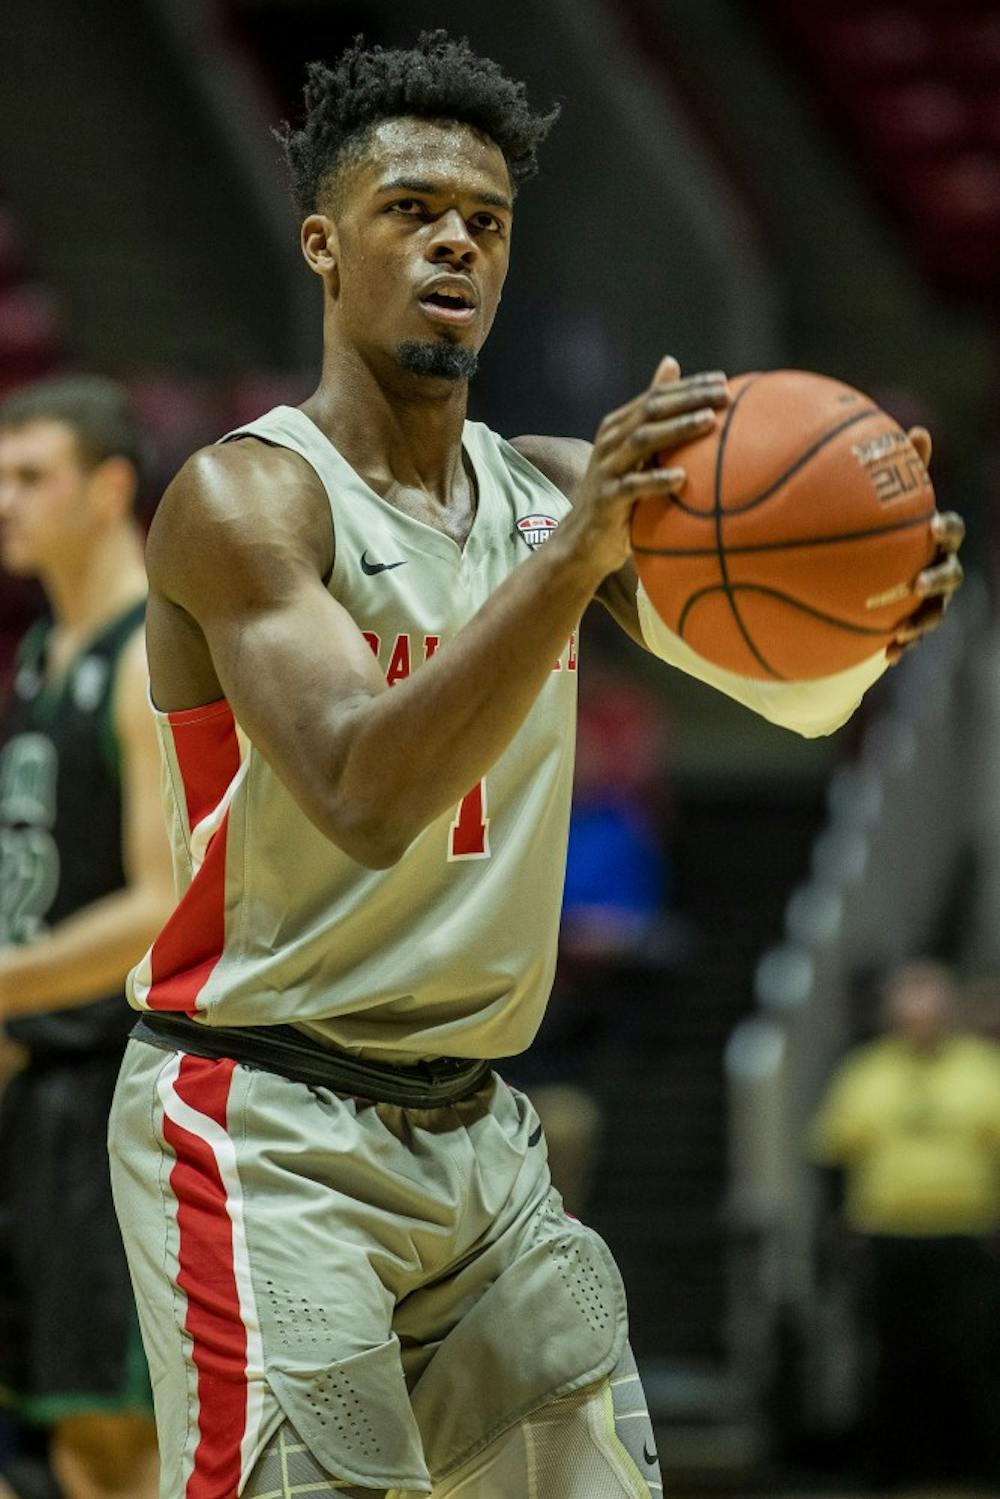 <p>Redshirt junior K.J. Walton shoots a free throw at the John E. Worthen Arena against Ohio University on Jan. 12, 2019. Walton had 10 points for the Cardinals. <strong>Jacob Haberstroh,DN.</strong></p>